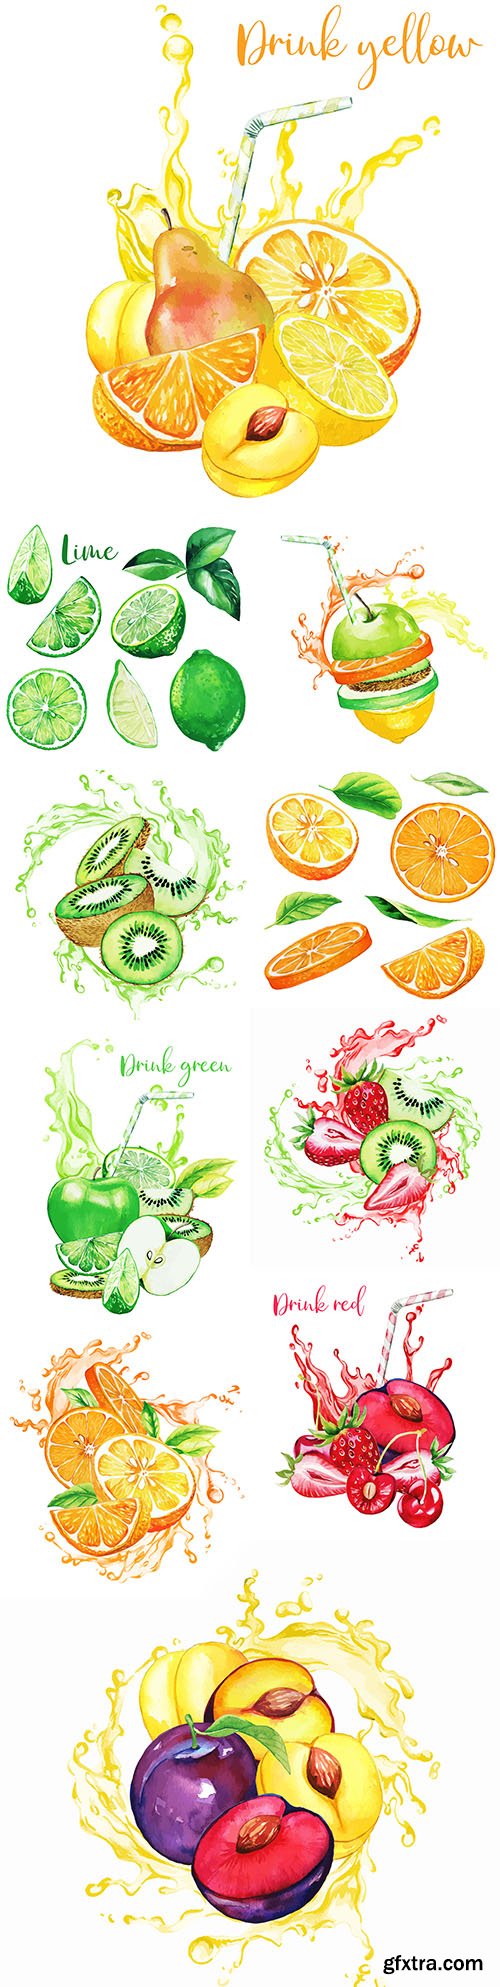 Juicy fruit composition with juice spray illustration
